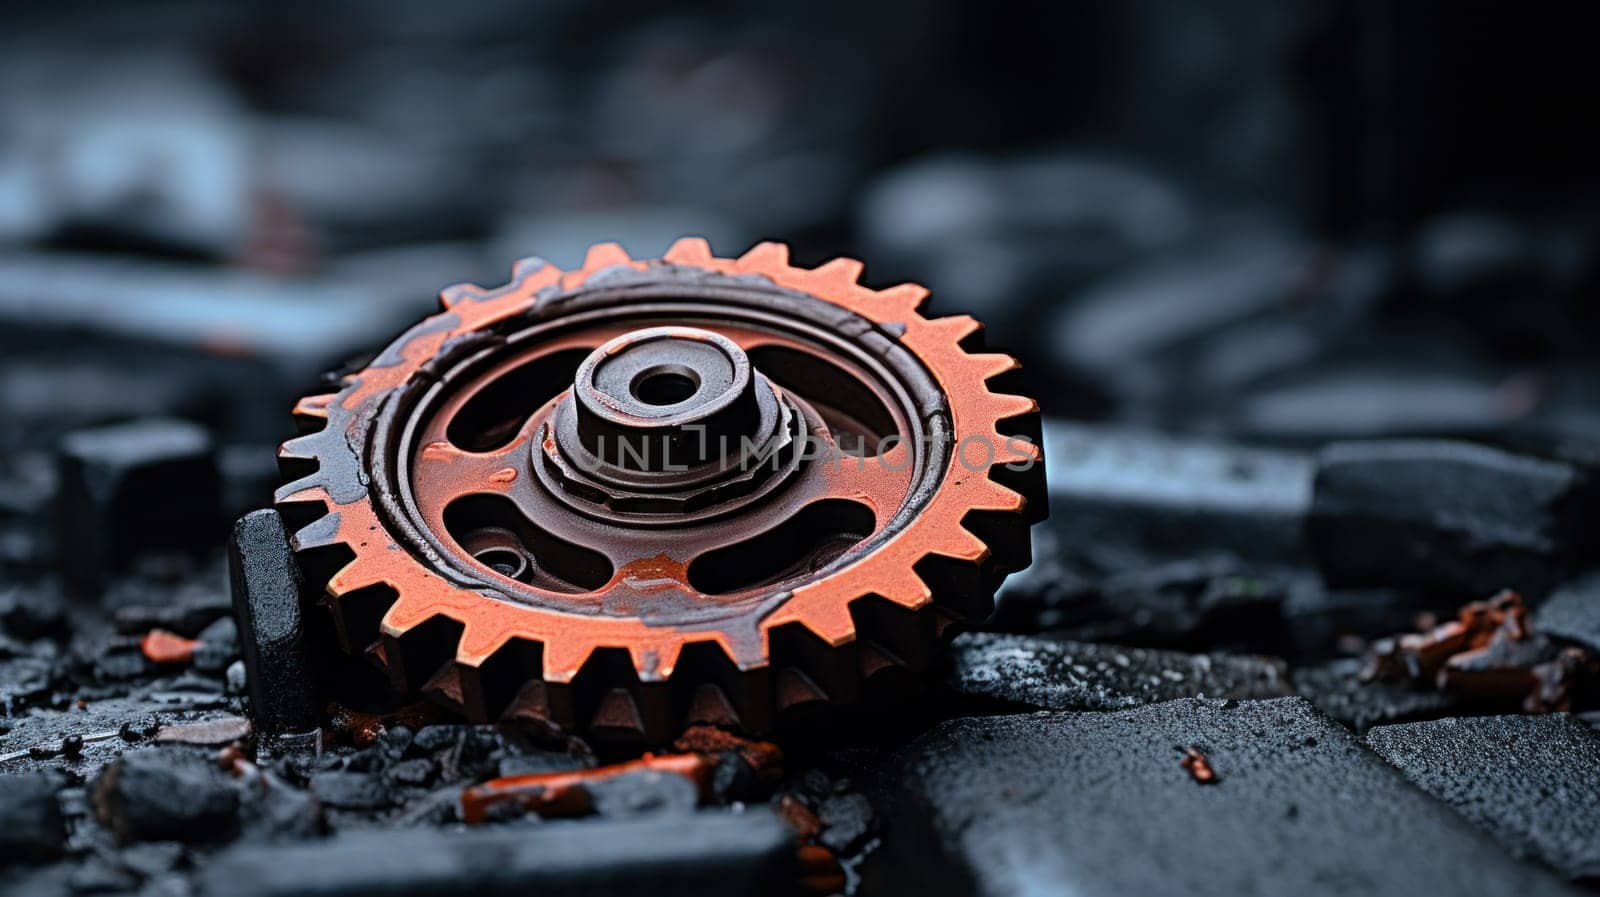 A close up of a gear wheel sitting on top of some rocks